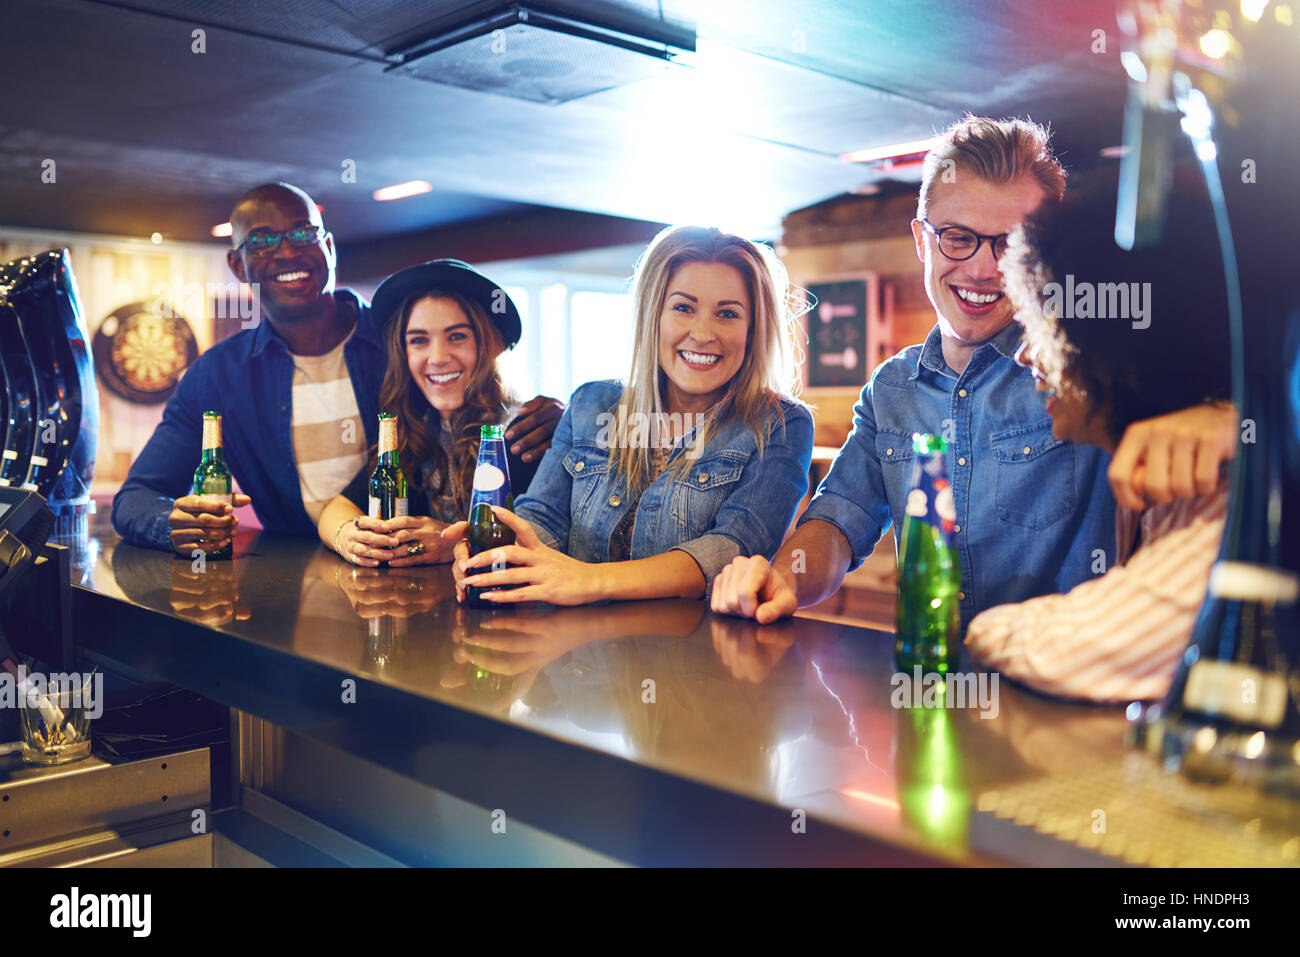 Horizontal shot of a smiling group of people looking at camera while drinking a beer in the bar. Stock Photo